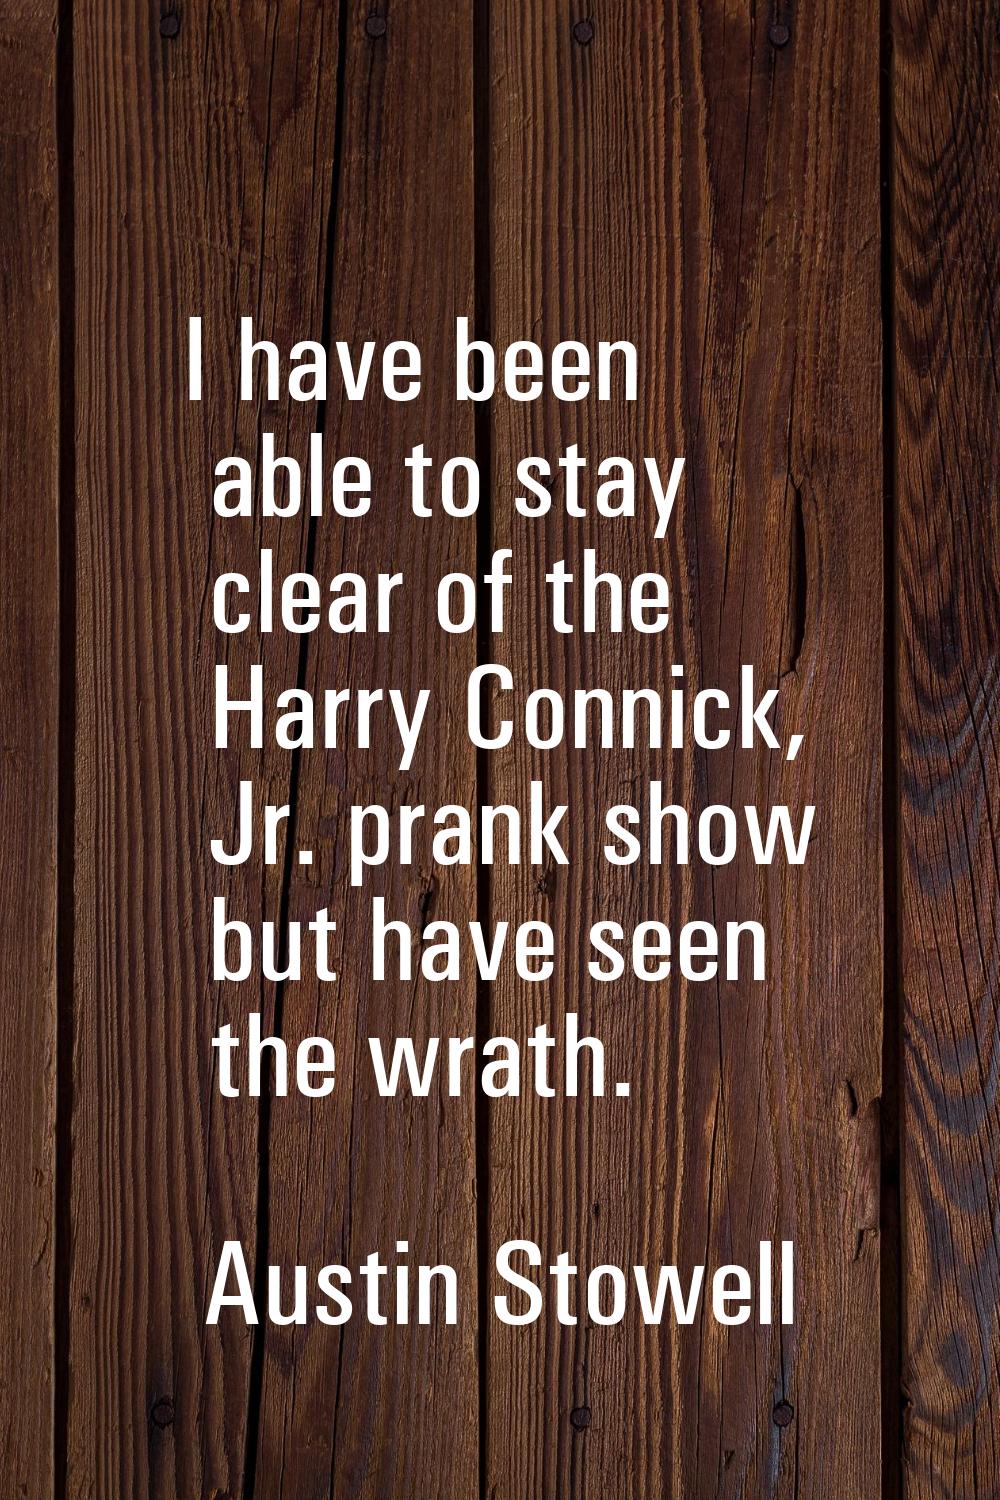 I have been able to stay clear of the Harry Connick, Jr. prank show but have seen the wrath.